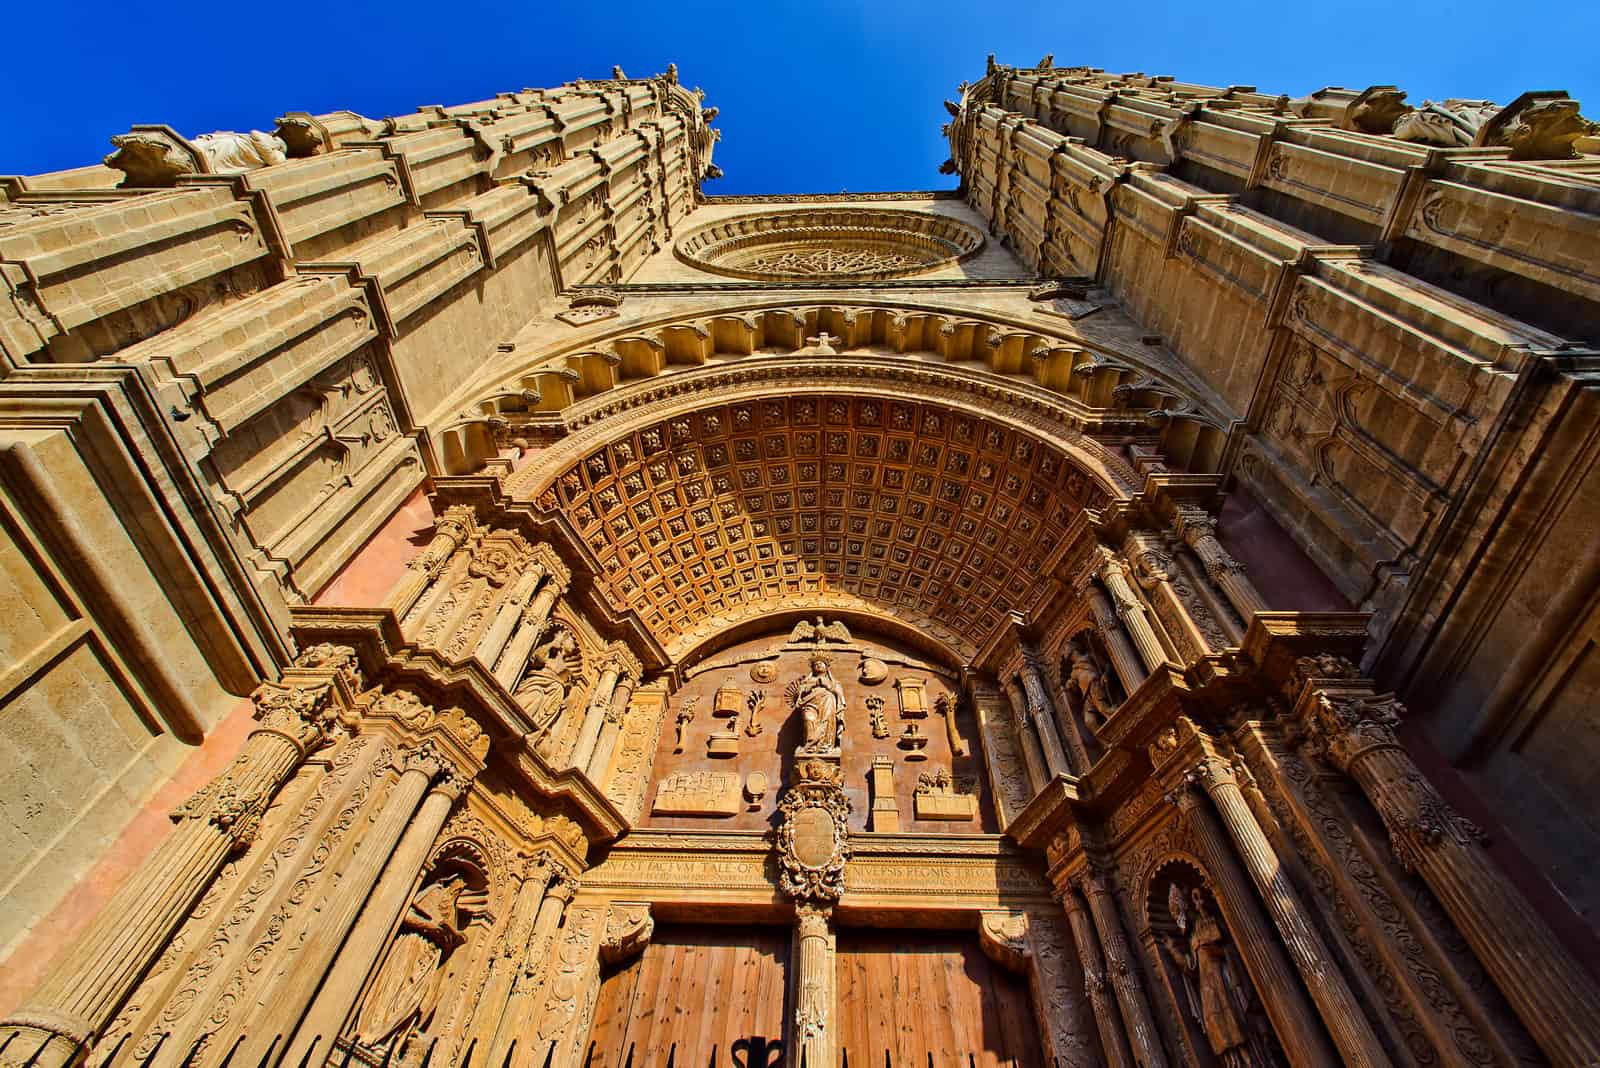 High quality picture of Cathedral at Palma de Majorca

